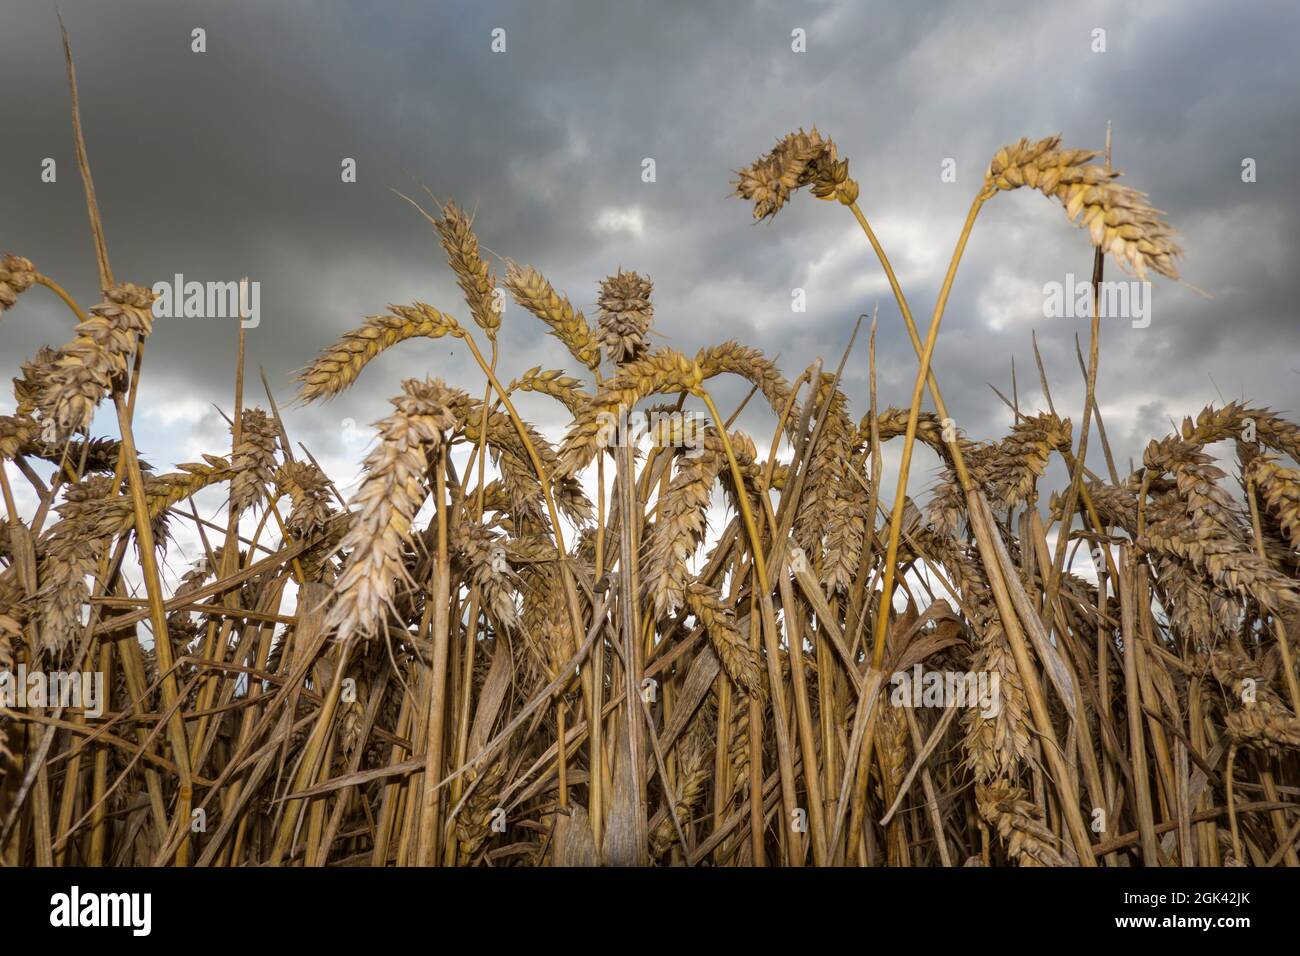 Ripe golden wheat from low angle against dark grey sky, Oxfordshire, England, United Kingdom, Europe Stock Photo